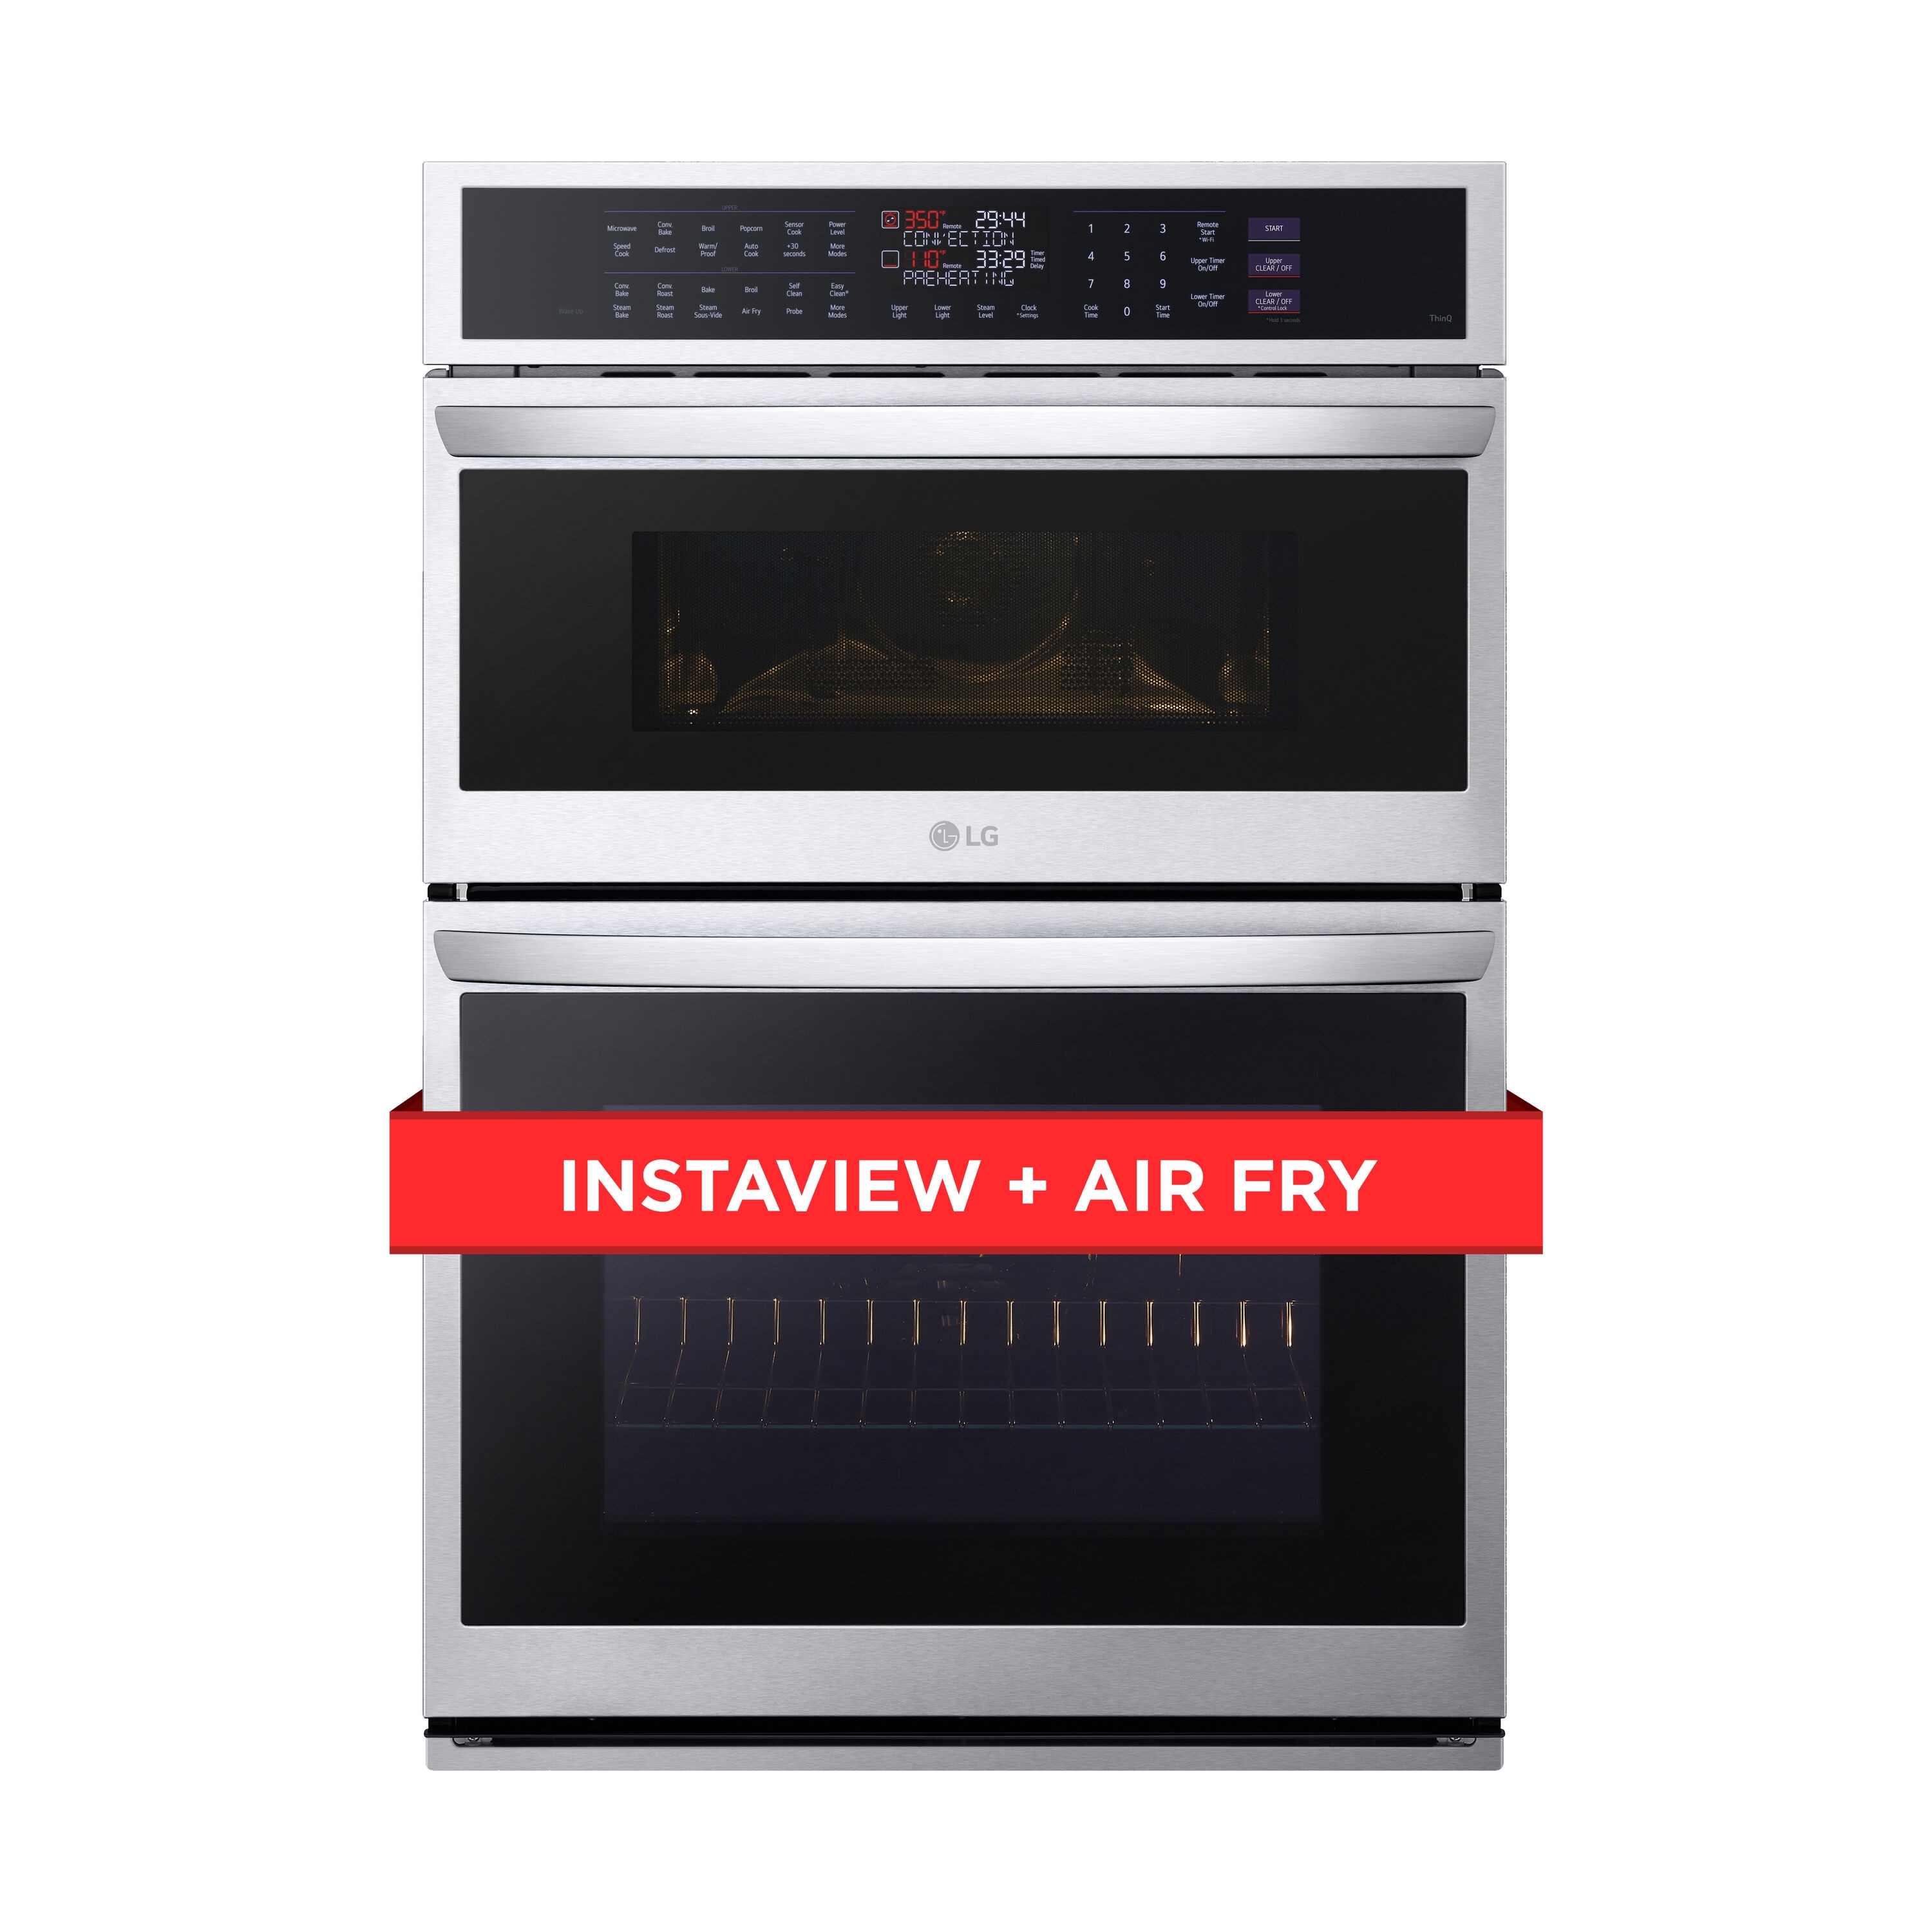 Looking for a versatile appliance that can handle both microwave